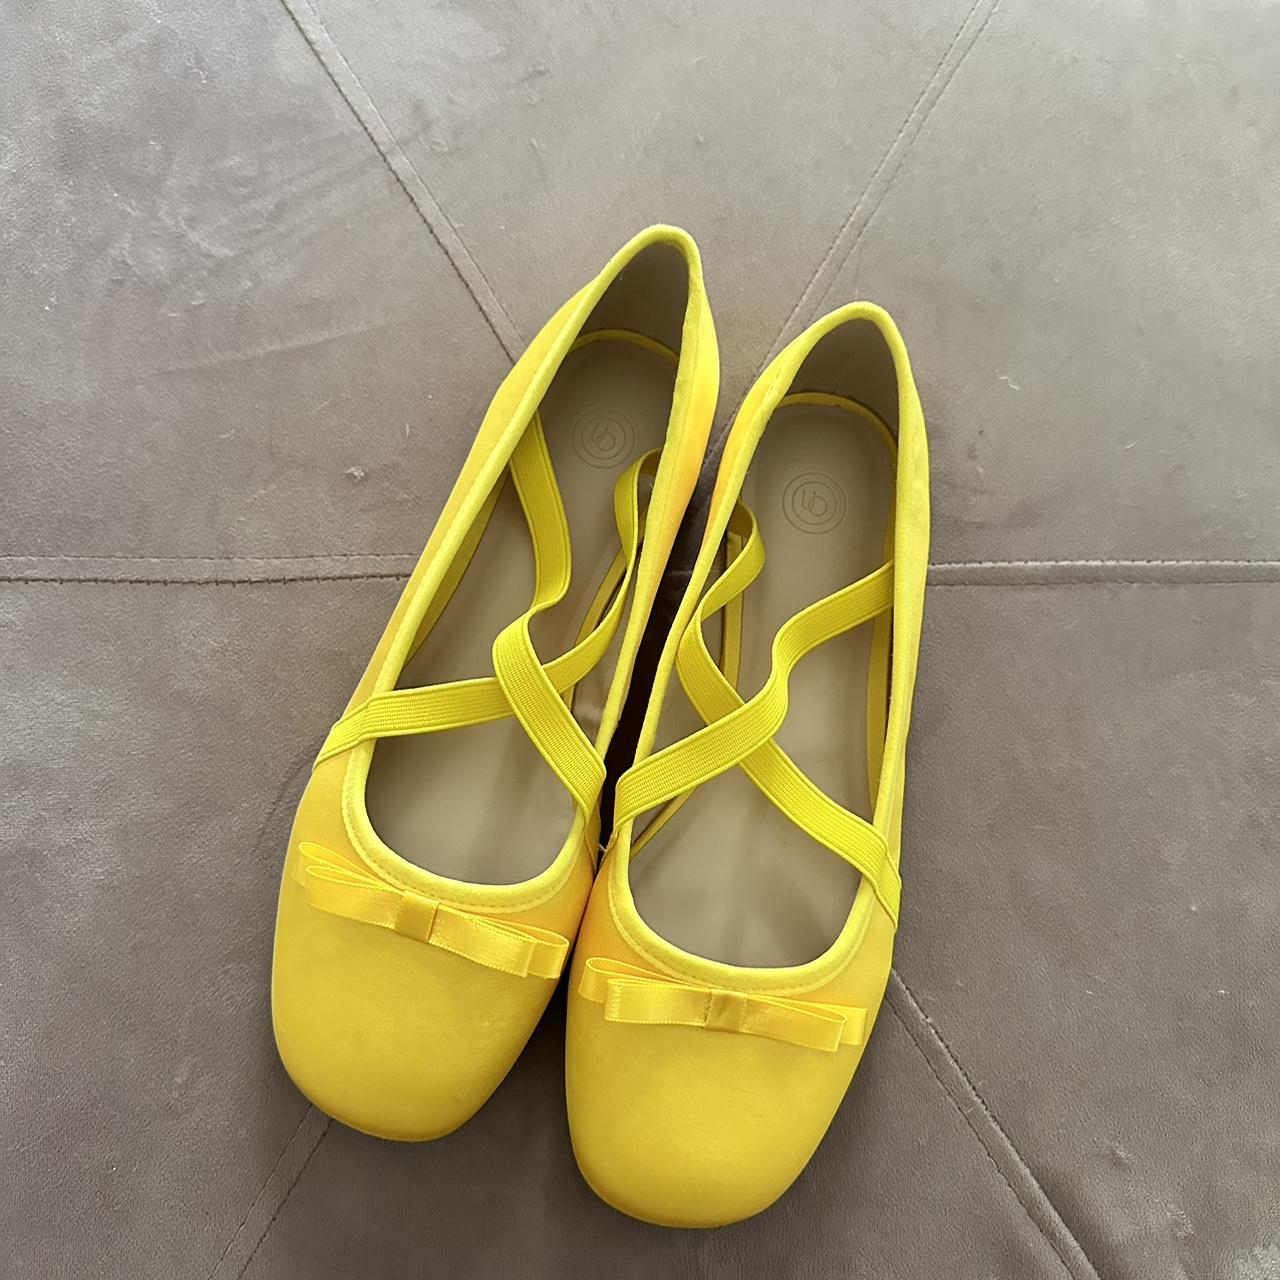 yellow pointe shoes